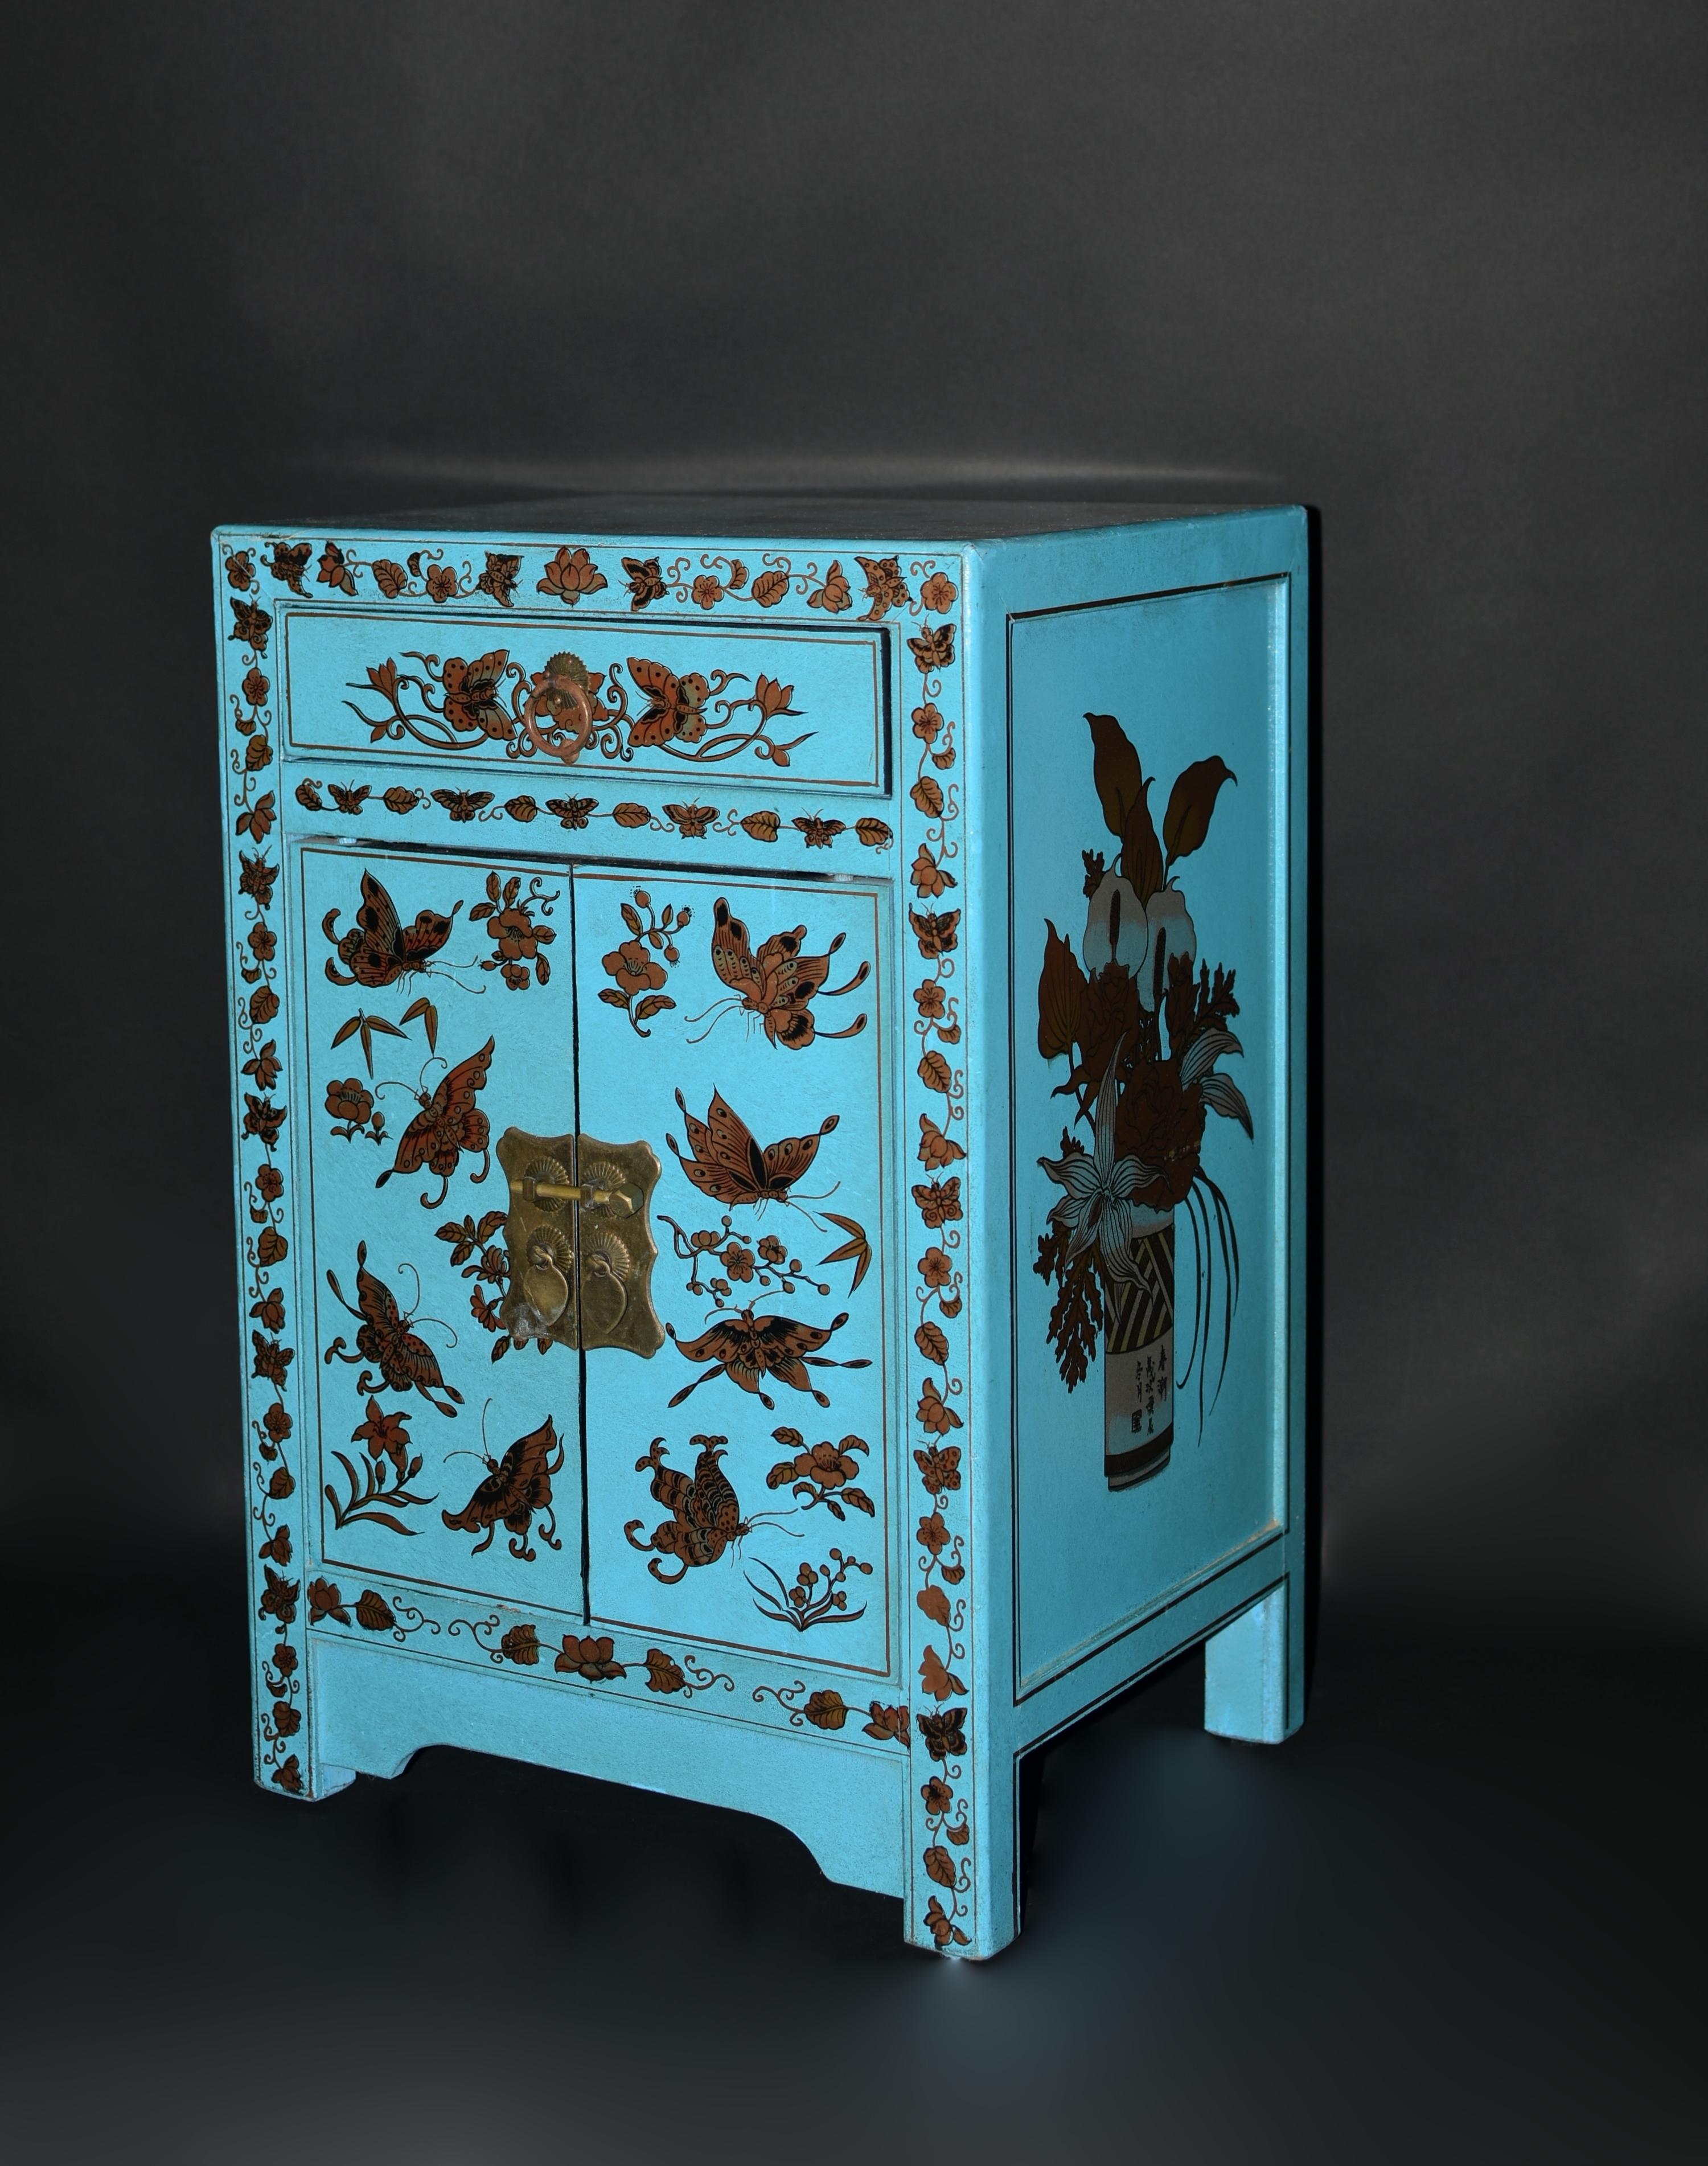 A beautiful hand painted turquoise lacquered cabinet, night stand. Cabinet is hand painted with butterflies and various seasonal flowers such as peonies, begonias, prunus blossoms and lilies. One side of the cabinet features a group of blooming